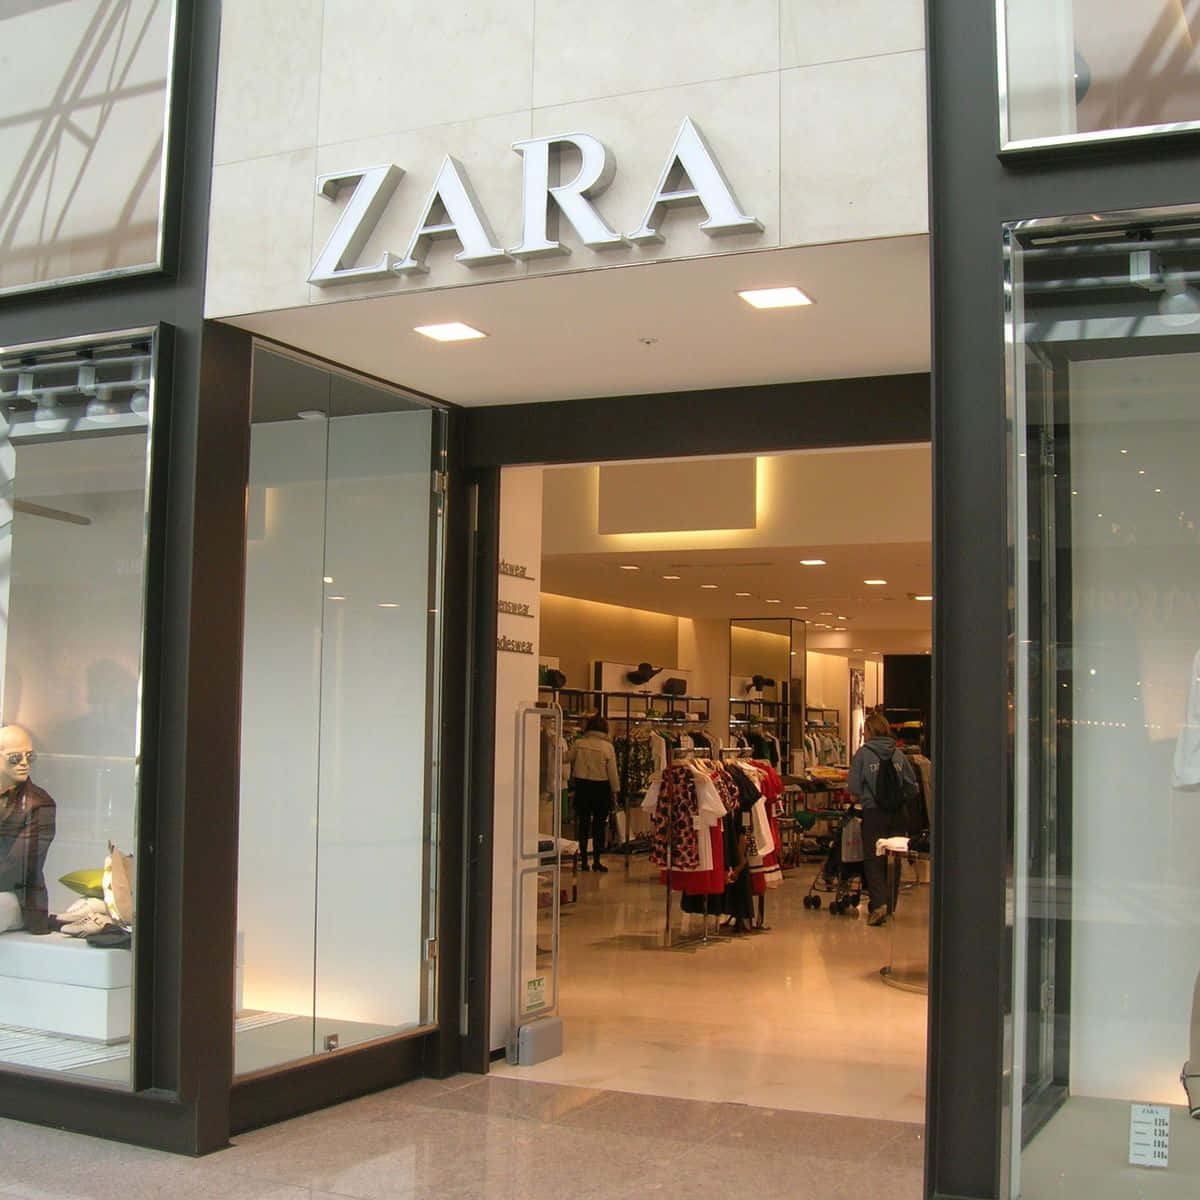 Look stylish and professional with Zara's workwear collection